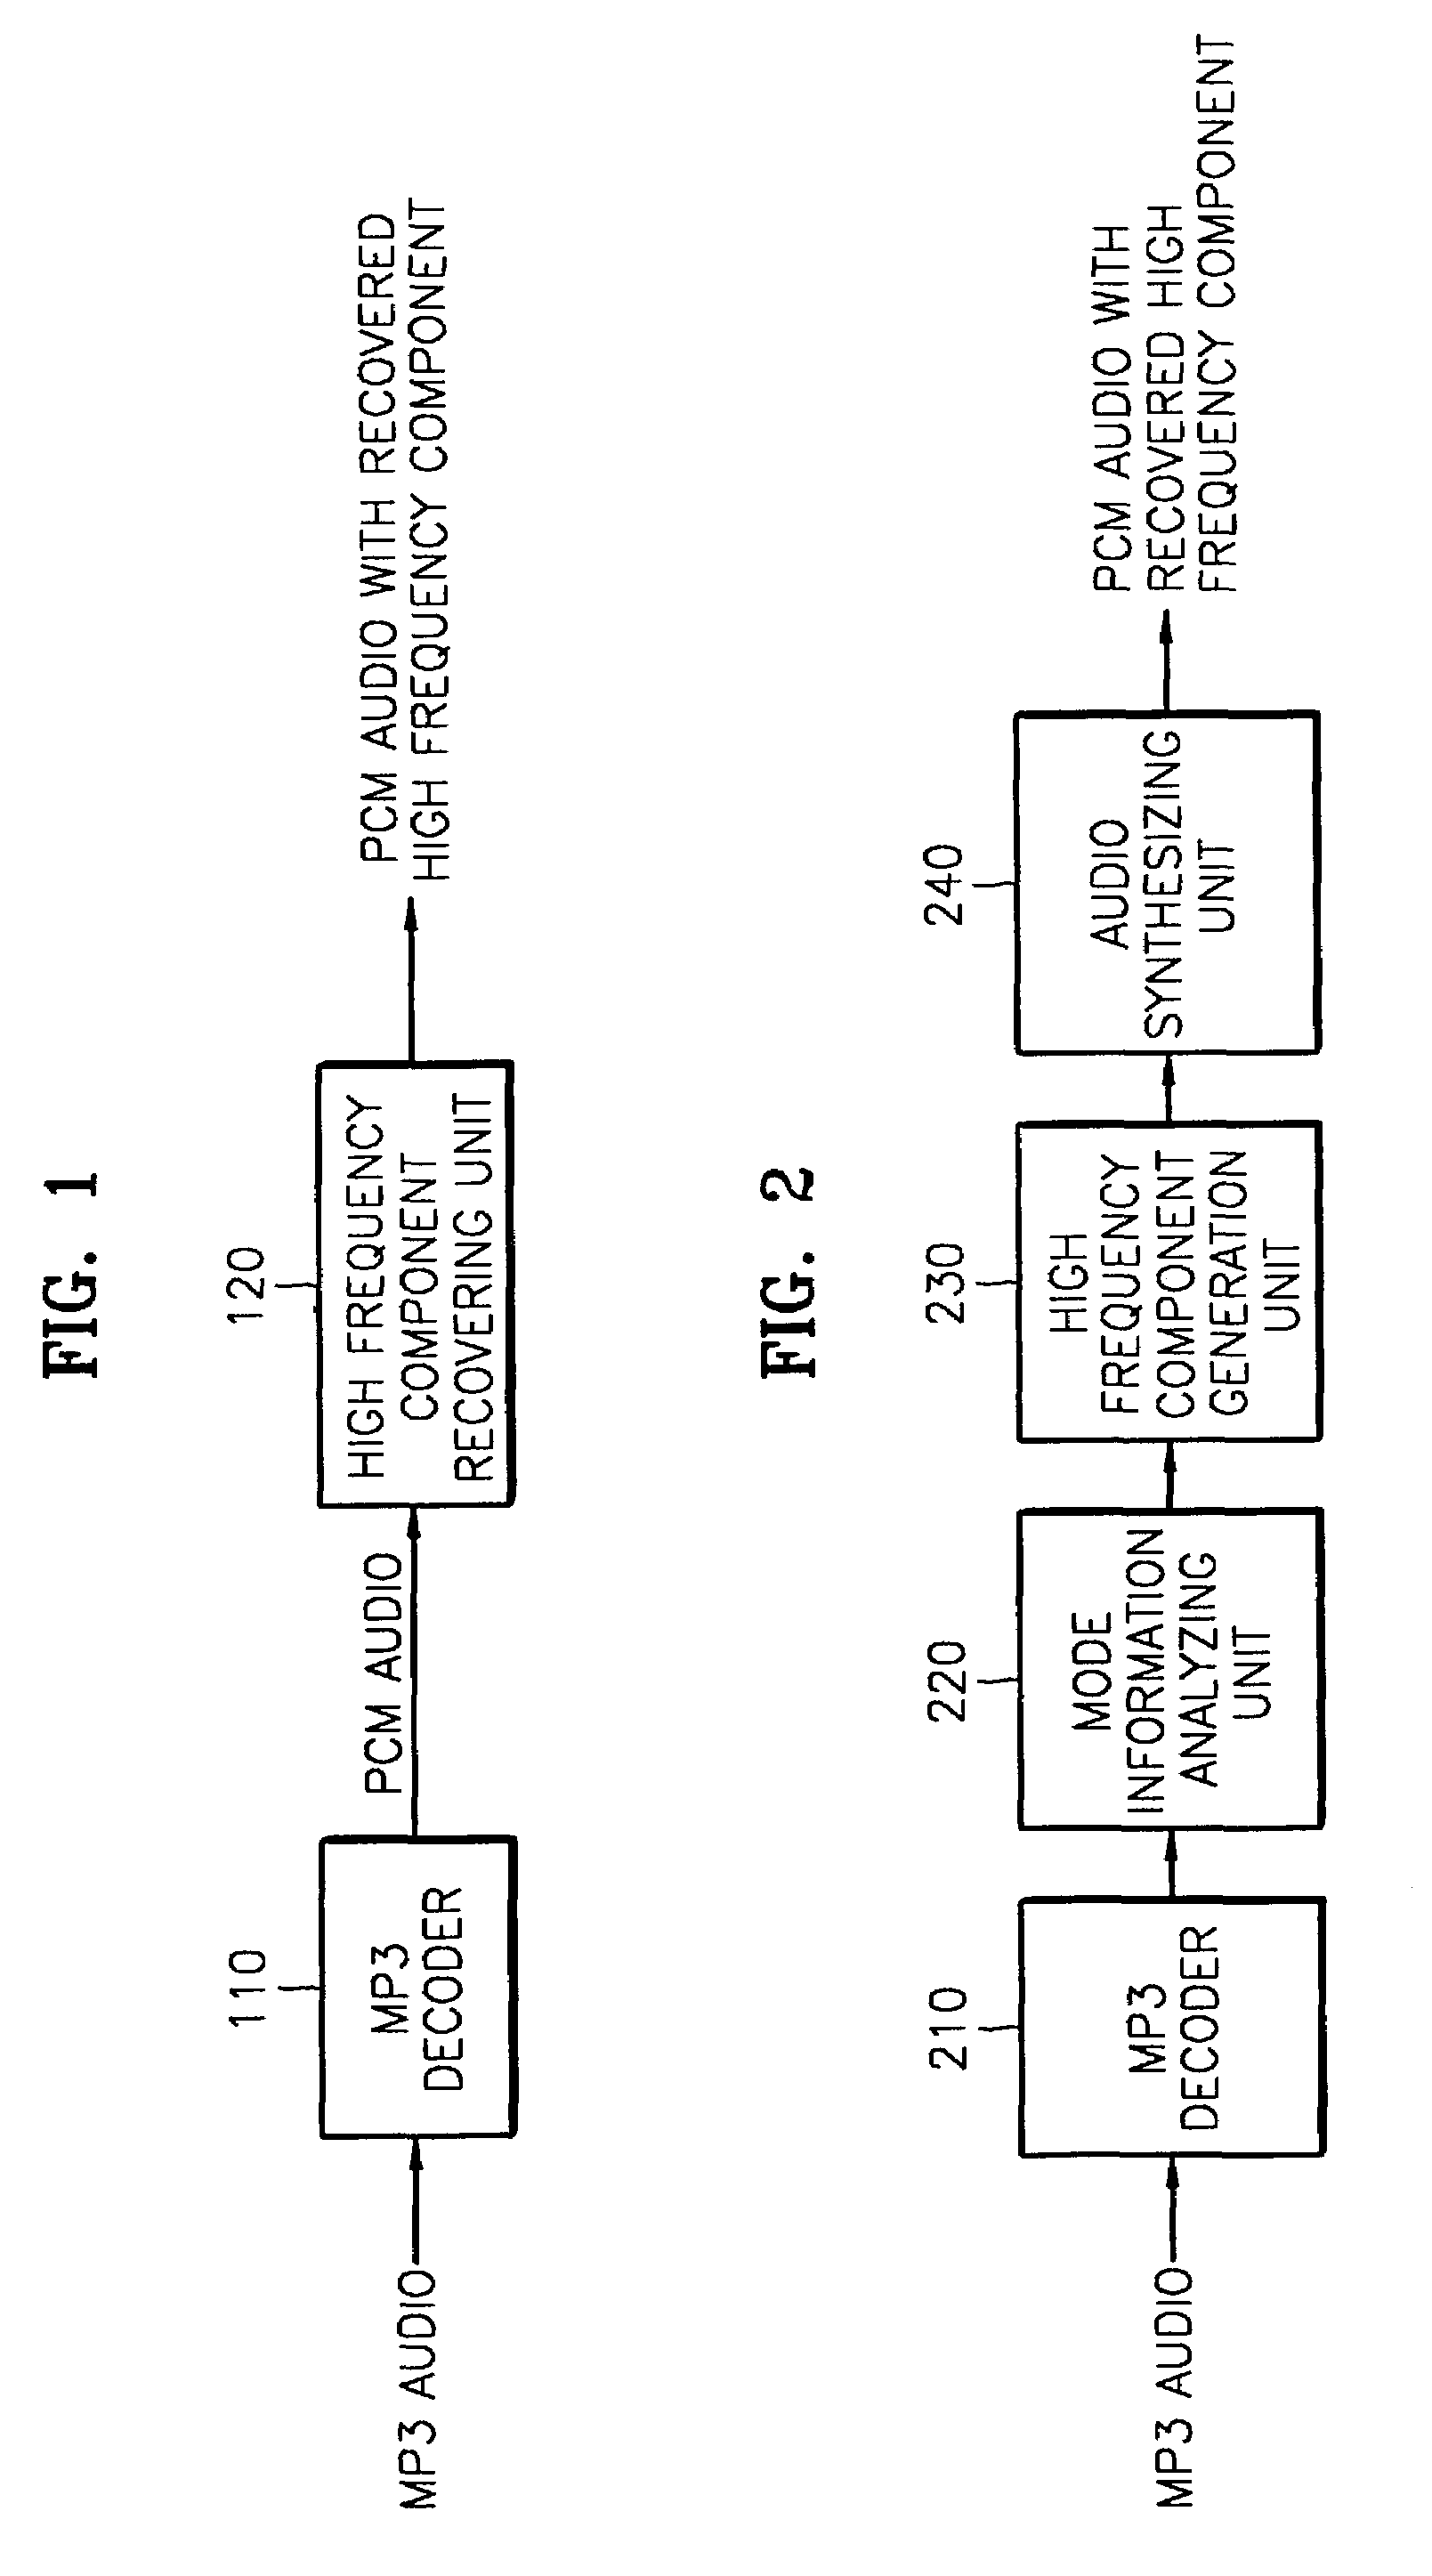 Audio decoding method and apparatus which recover high frequency component with small computation